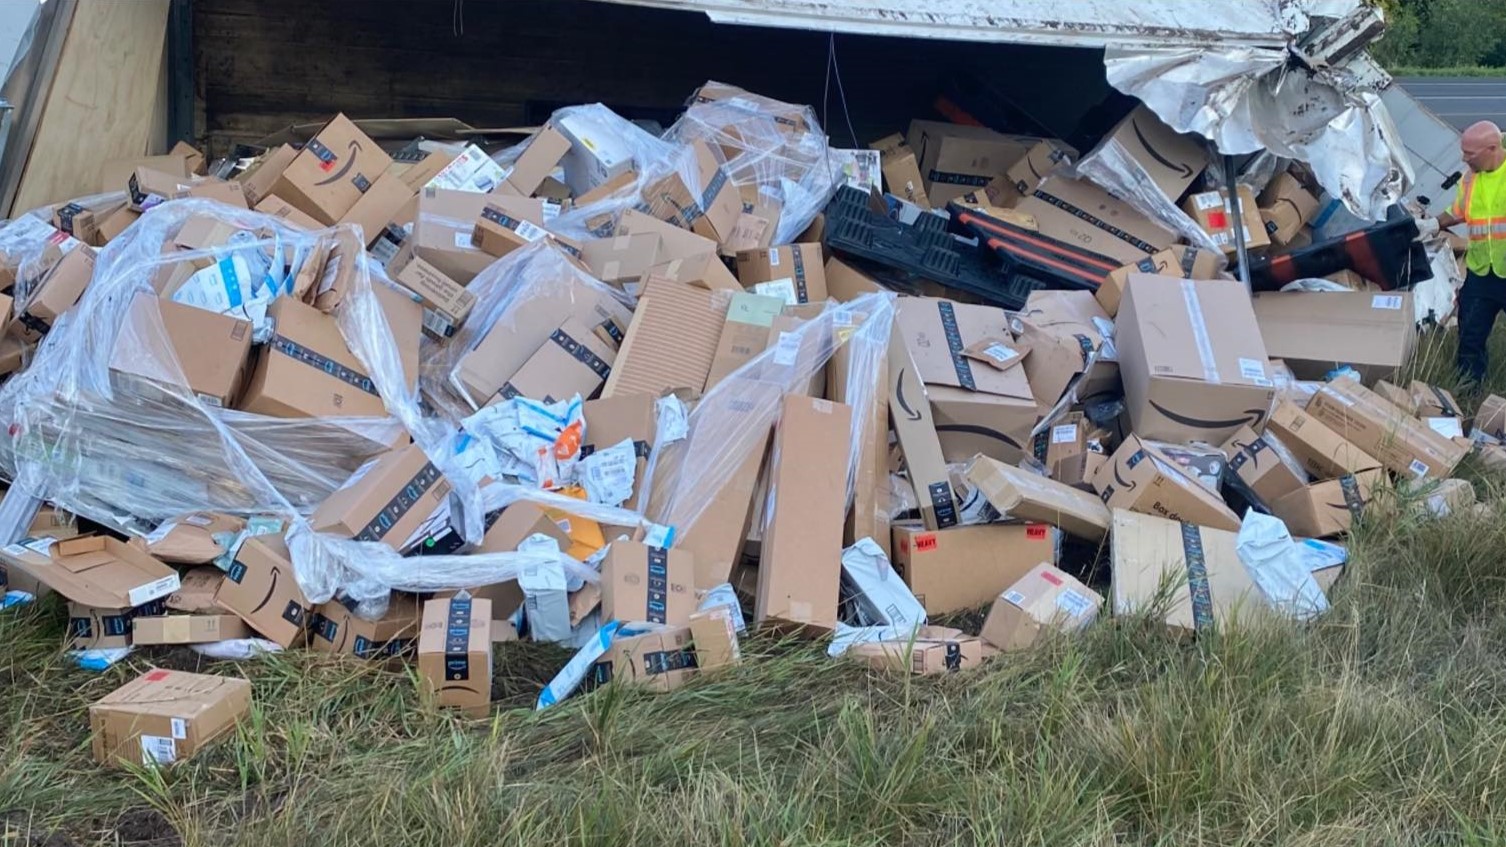 Authorities respond to crash that dumped hundreds of Amazon packages in Wisconsin.